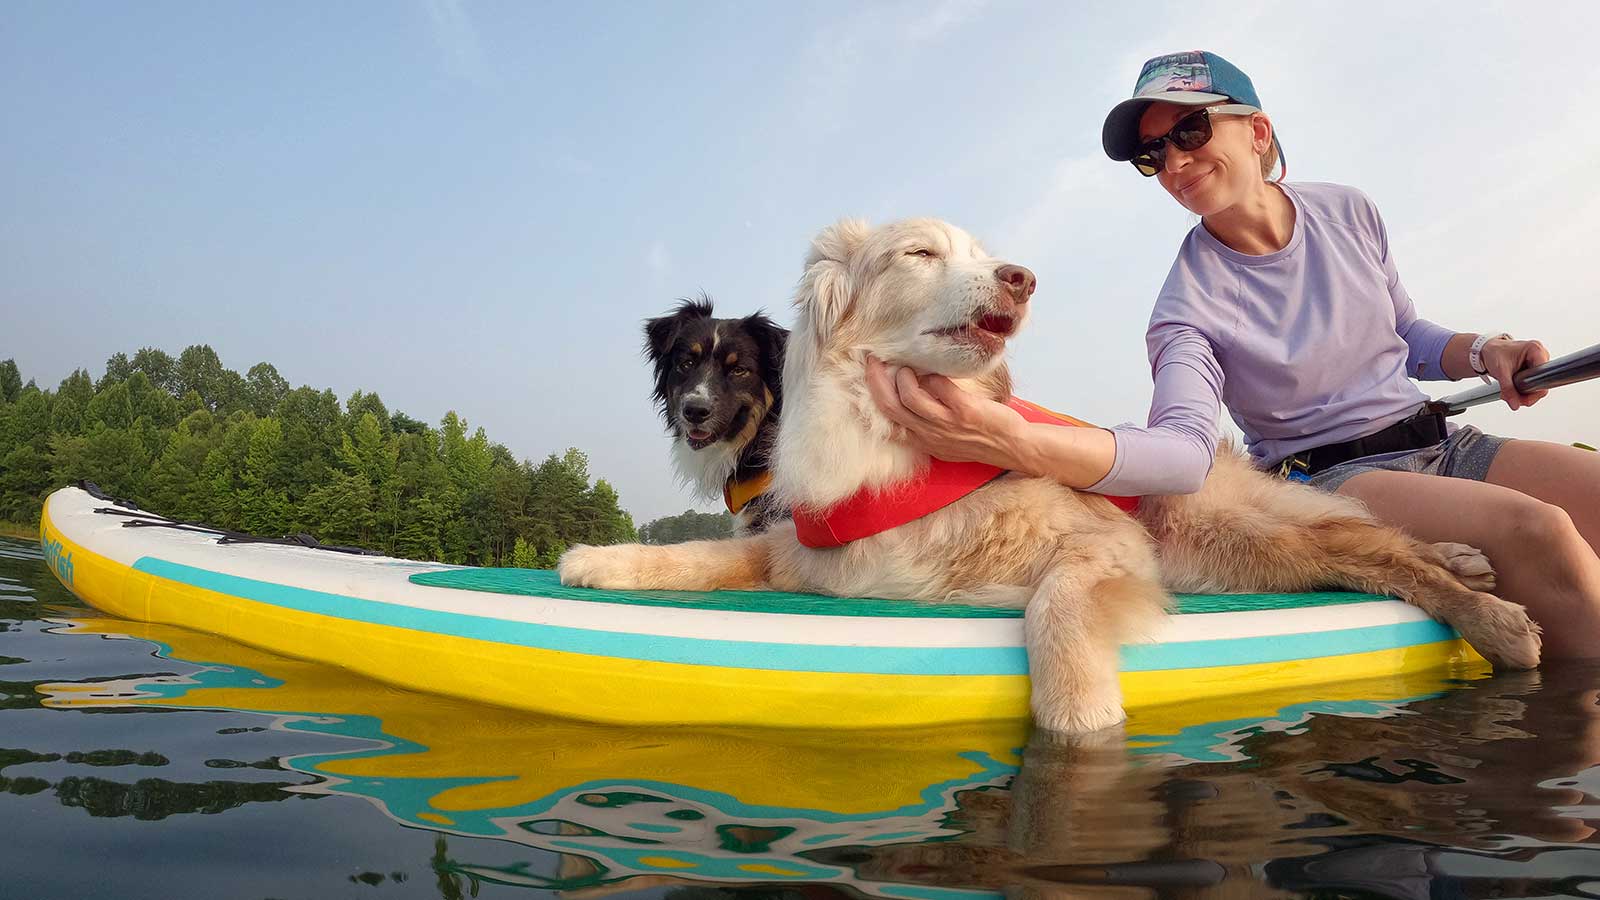 Riley floats with his doggo friends and Maria on a SUP.